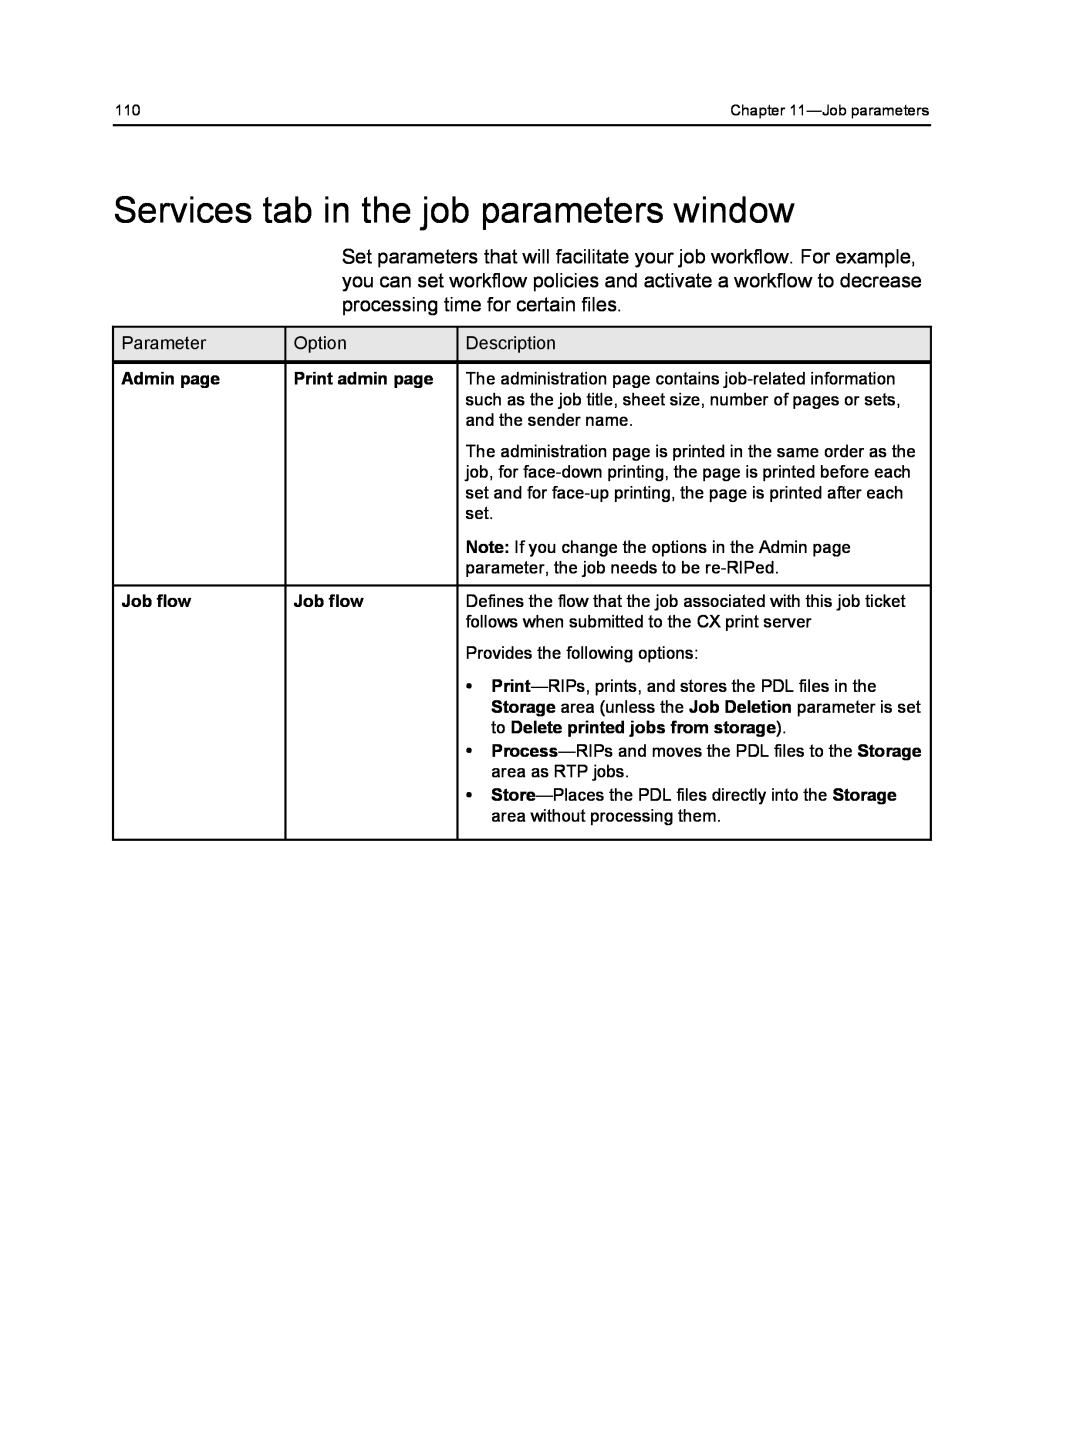 Xerox 560, 550 manual Services tab in the job parameters window, Admin page, Print admin page, Job flow 